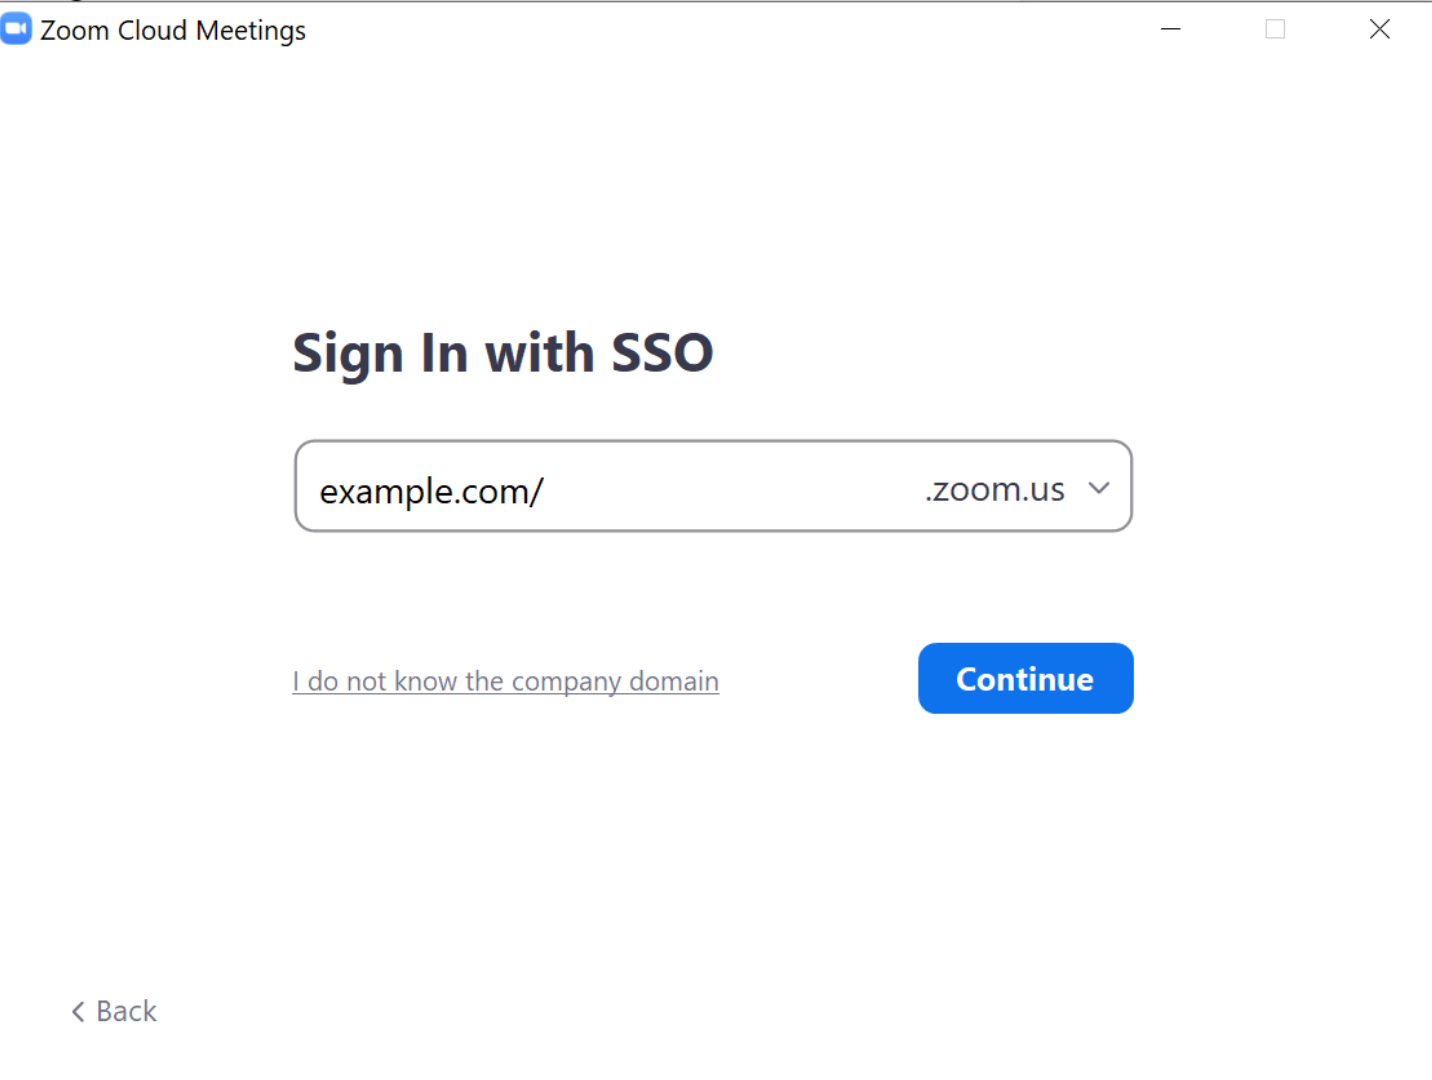 Zoom SSO sign in page with "example.com/" in box